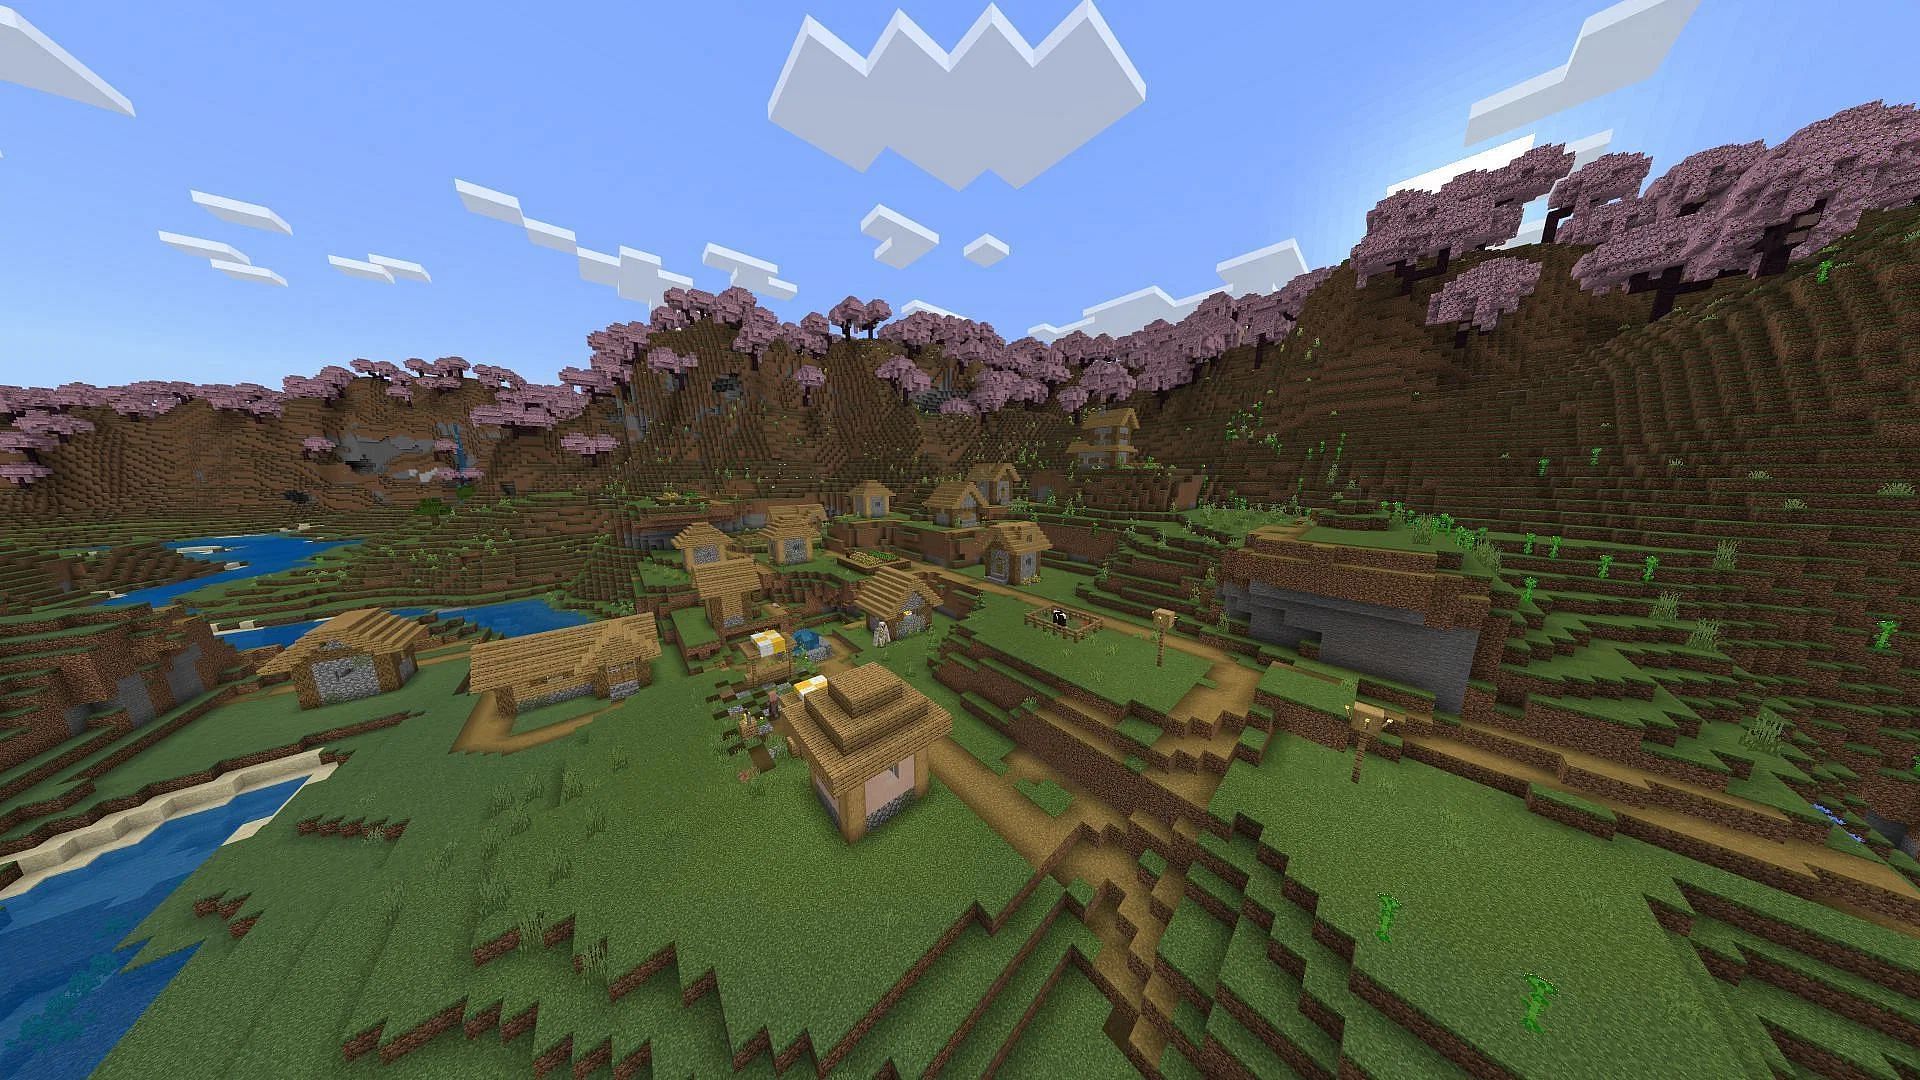 Minecraft fans won&rsquo;t lack for cherry grove biomes in this Java seed (Image via Mojang)